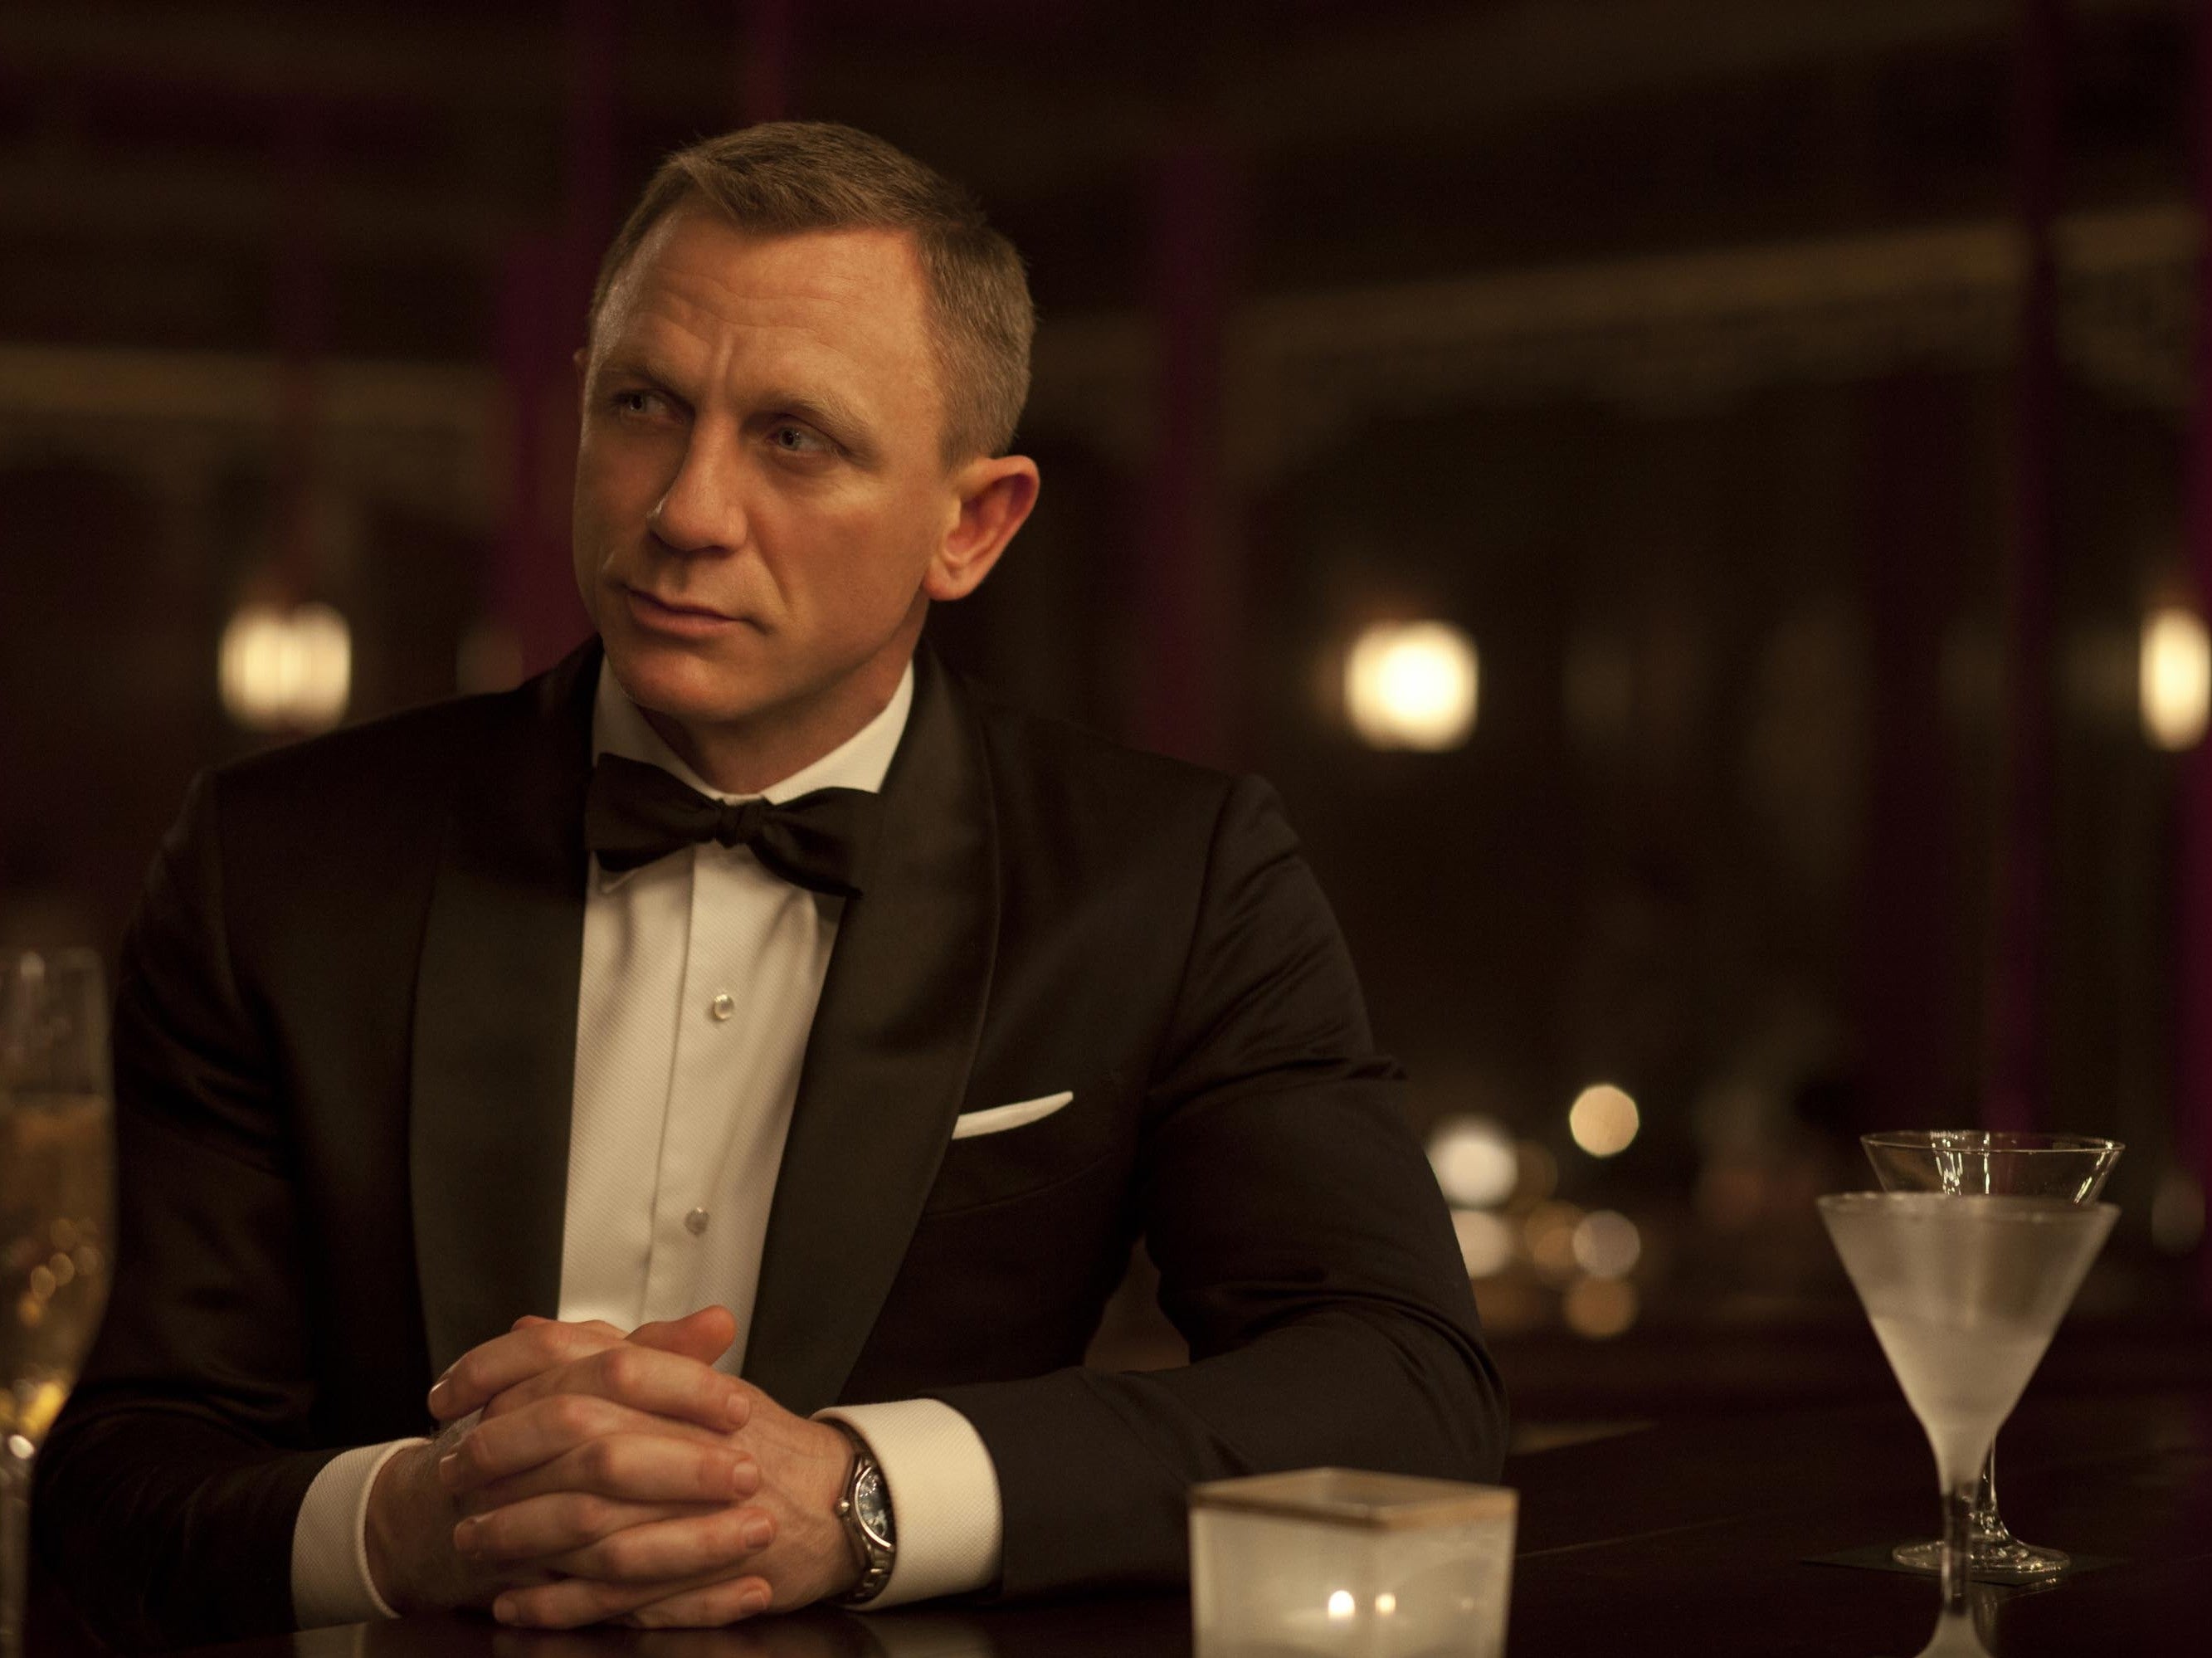 Daniel Craig has better things to do with his time, like drinking martinis